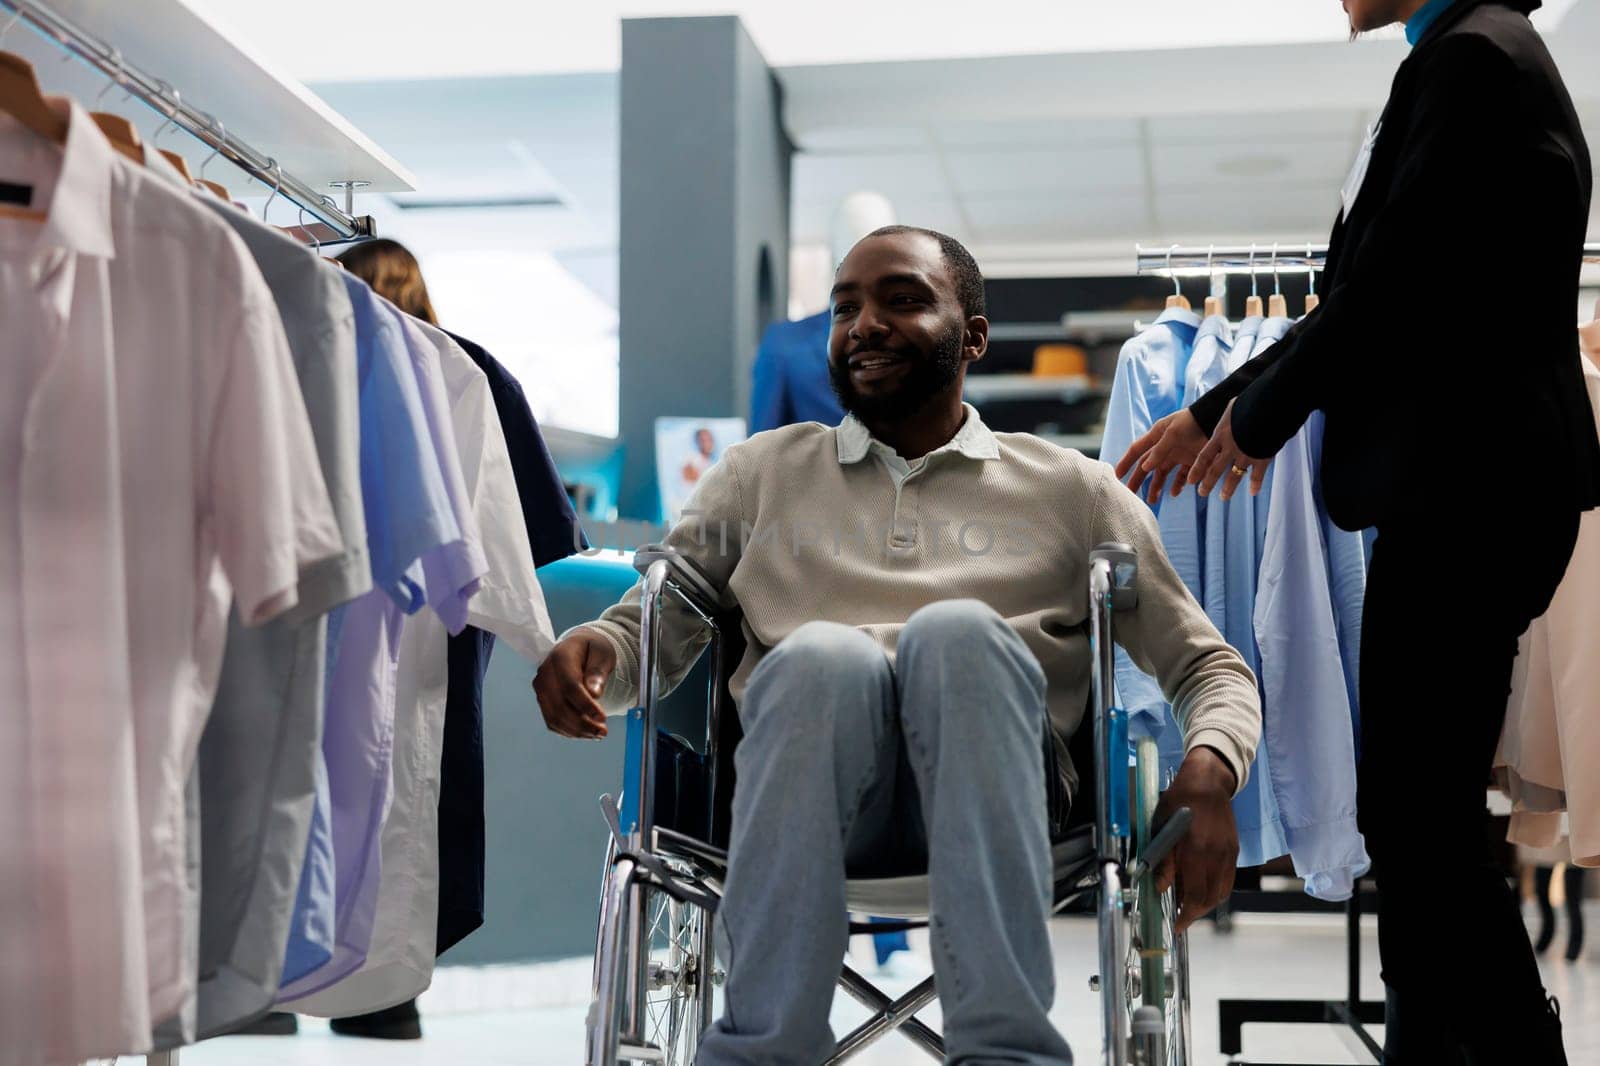 Smiling african american man in wheelchair getting assistance from clothing store employee while shopping for apparel. Menswear boutique customer with disability choosing outfit